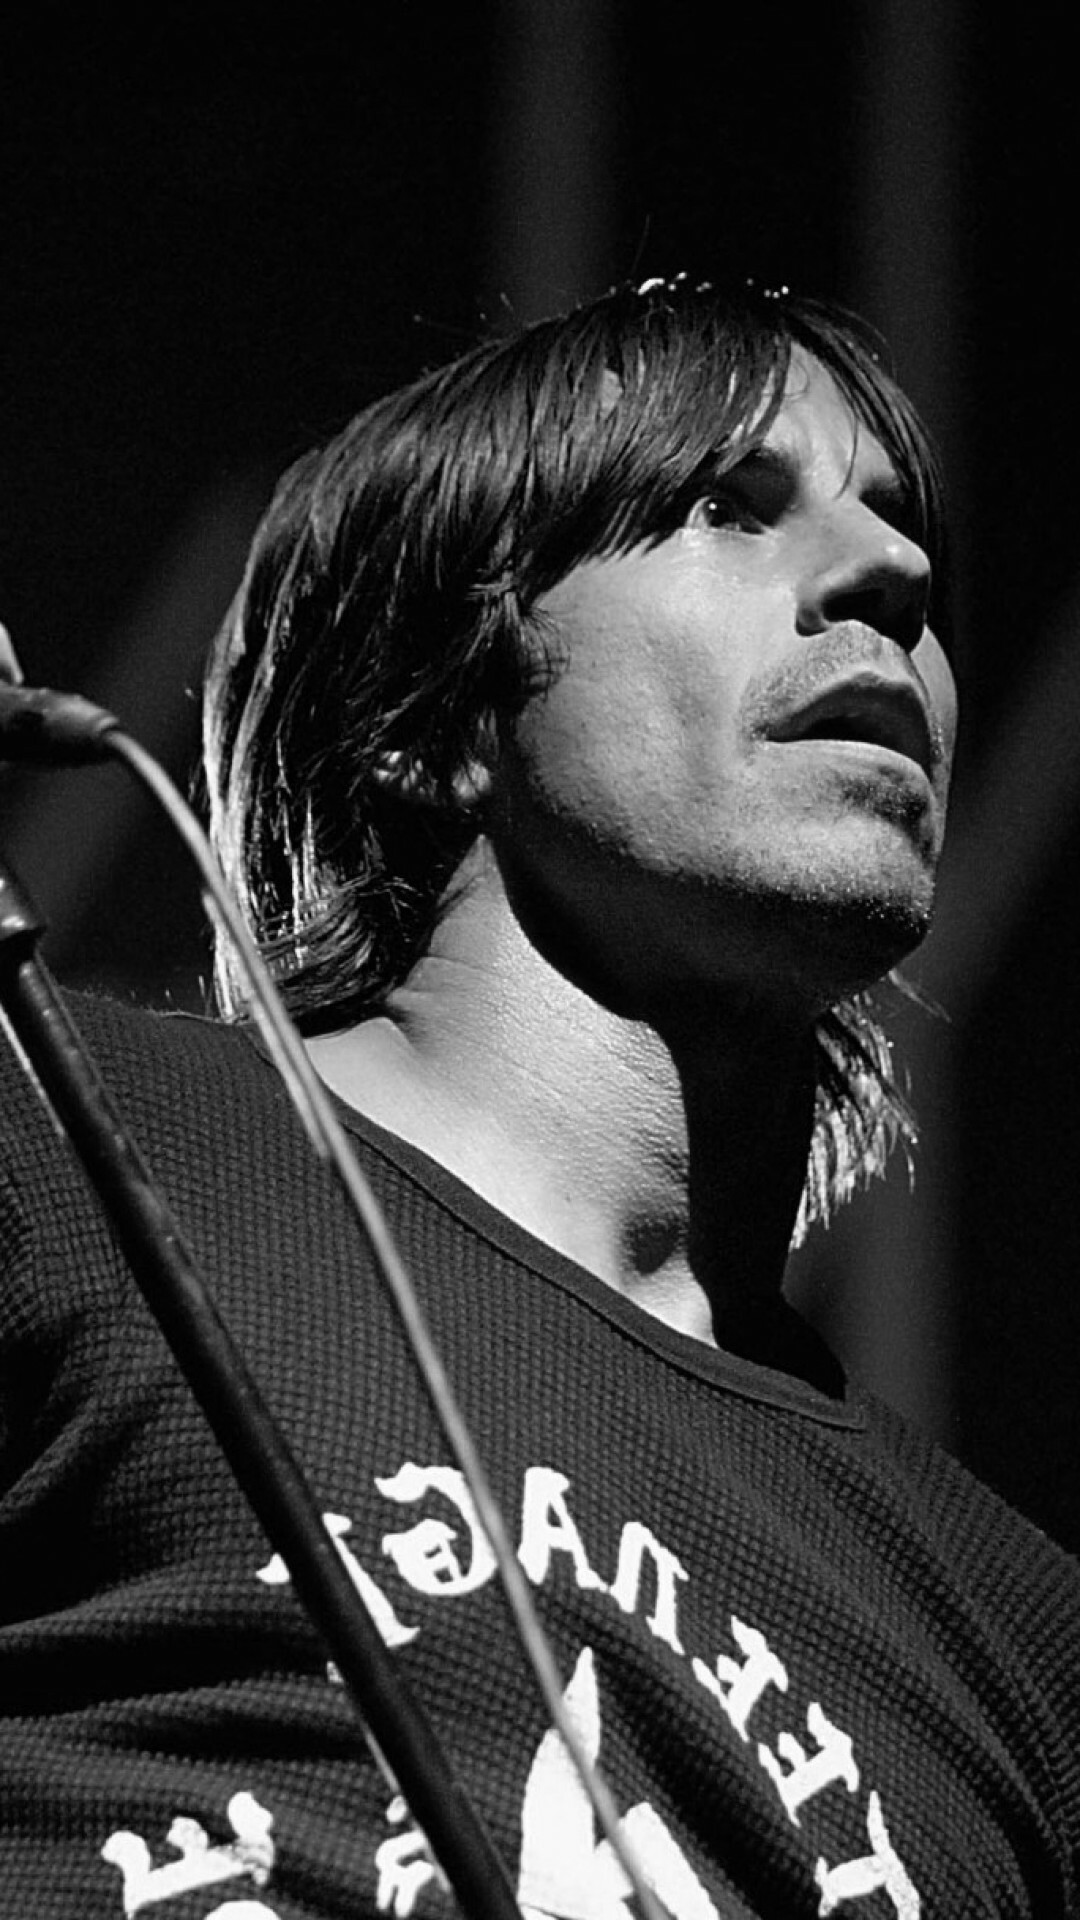 Red Hot Chilli Peppers: Singer, Anthony Kiedis, The rock group. 1080x1920 Full HD Wallpaper.